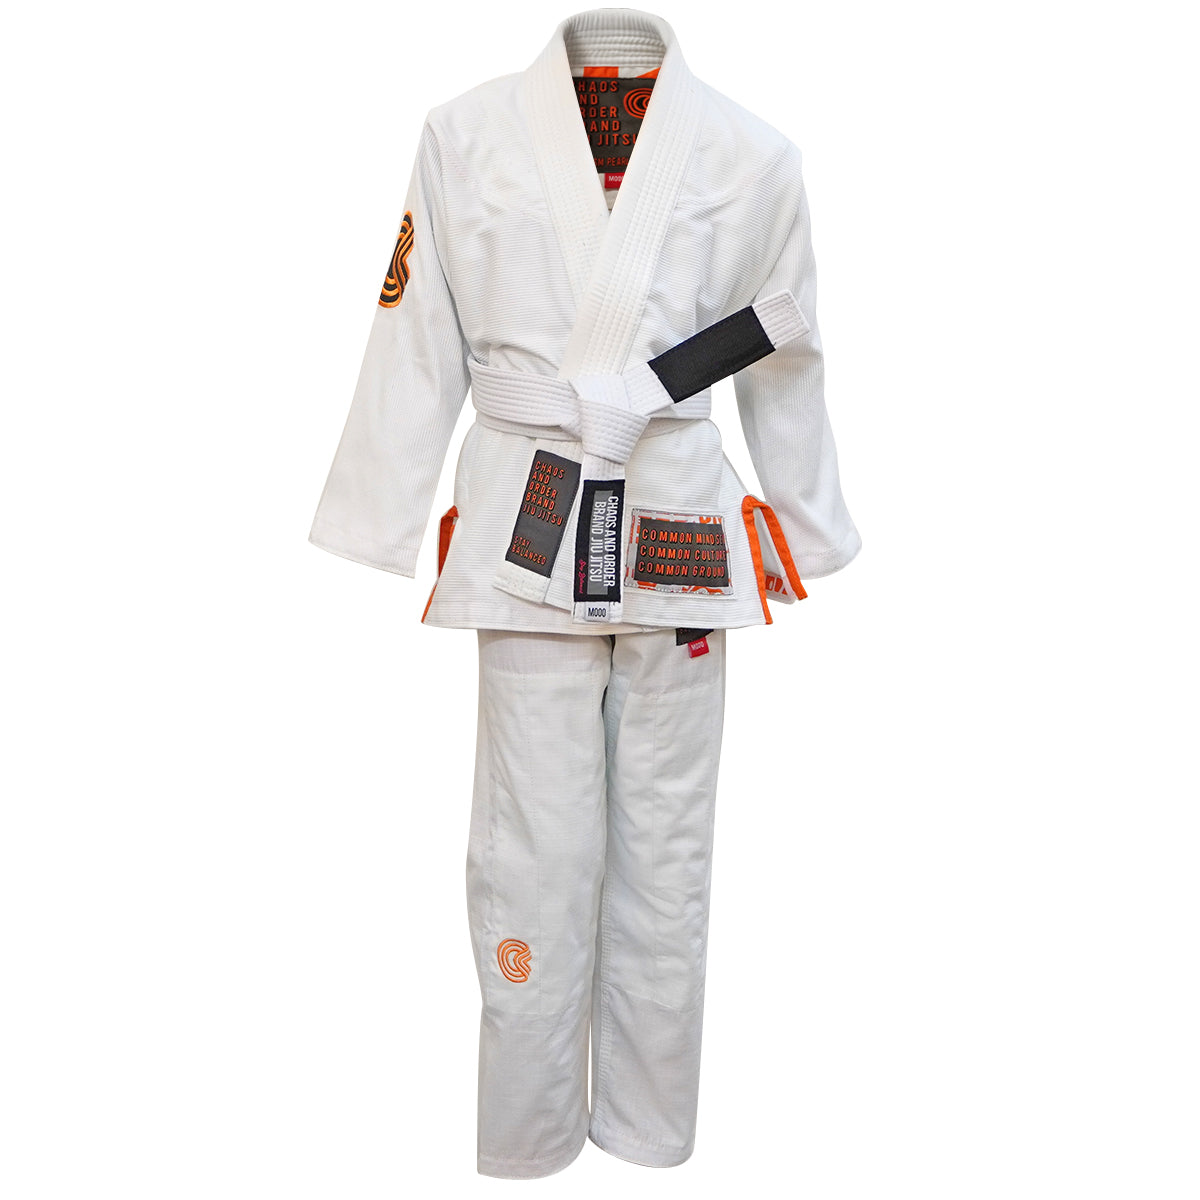 Chaos and Order Kid's Base Label V2 BJJ Gi - White Chaos and Order